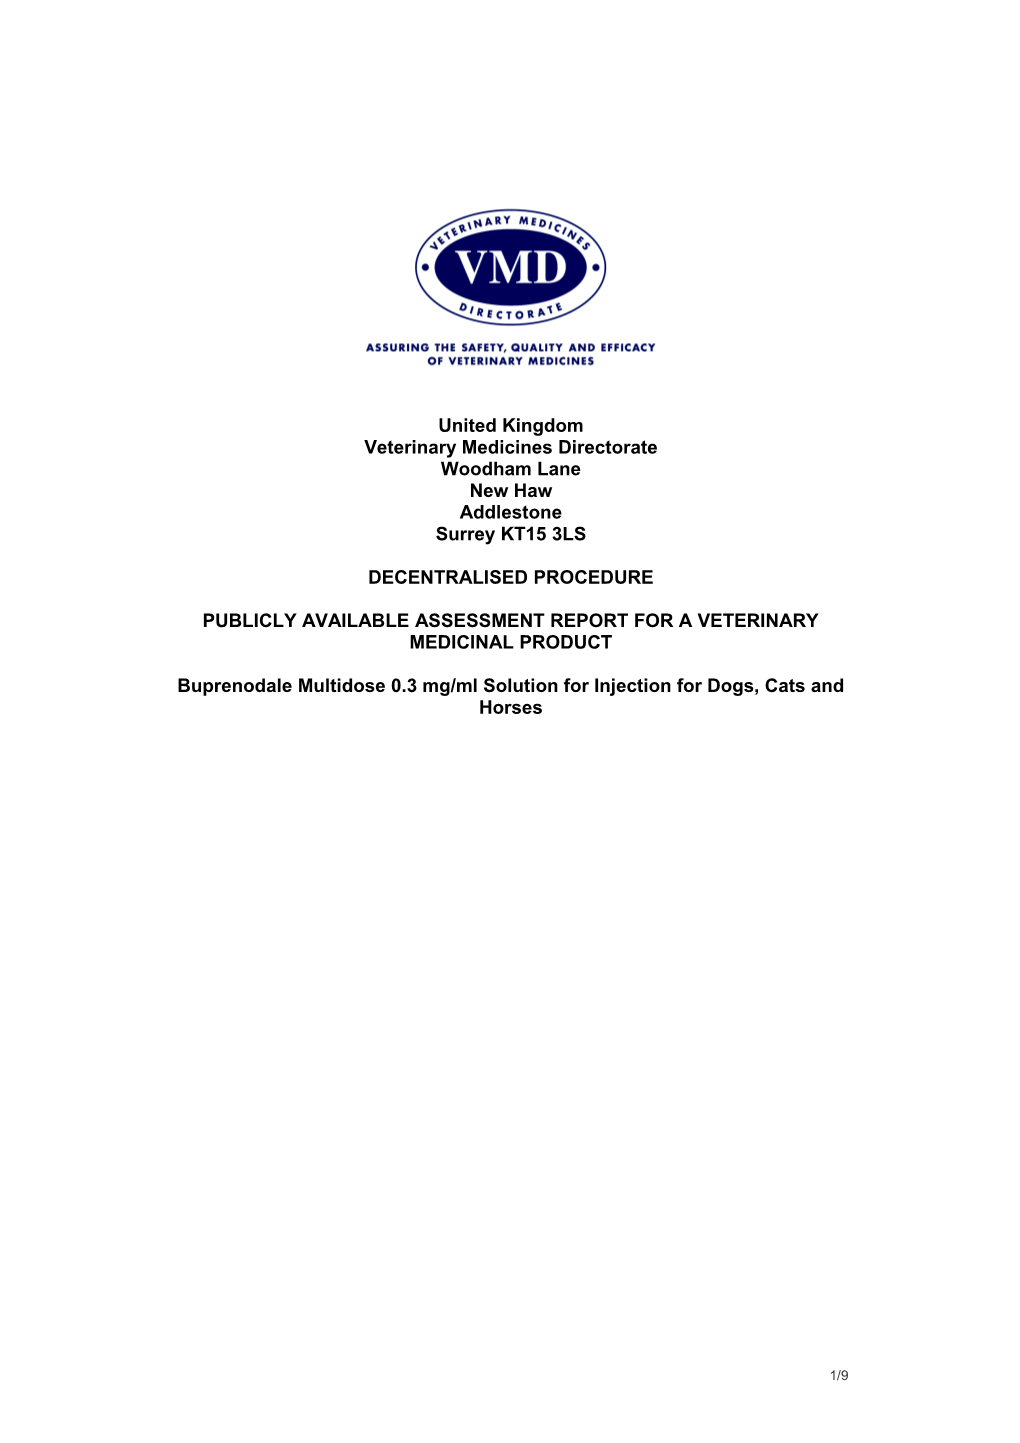 Publicly Available Assessment Report for a Veterinary Medicinal Product s12